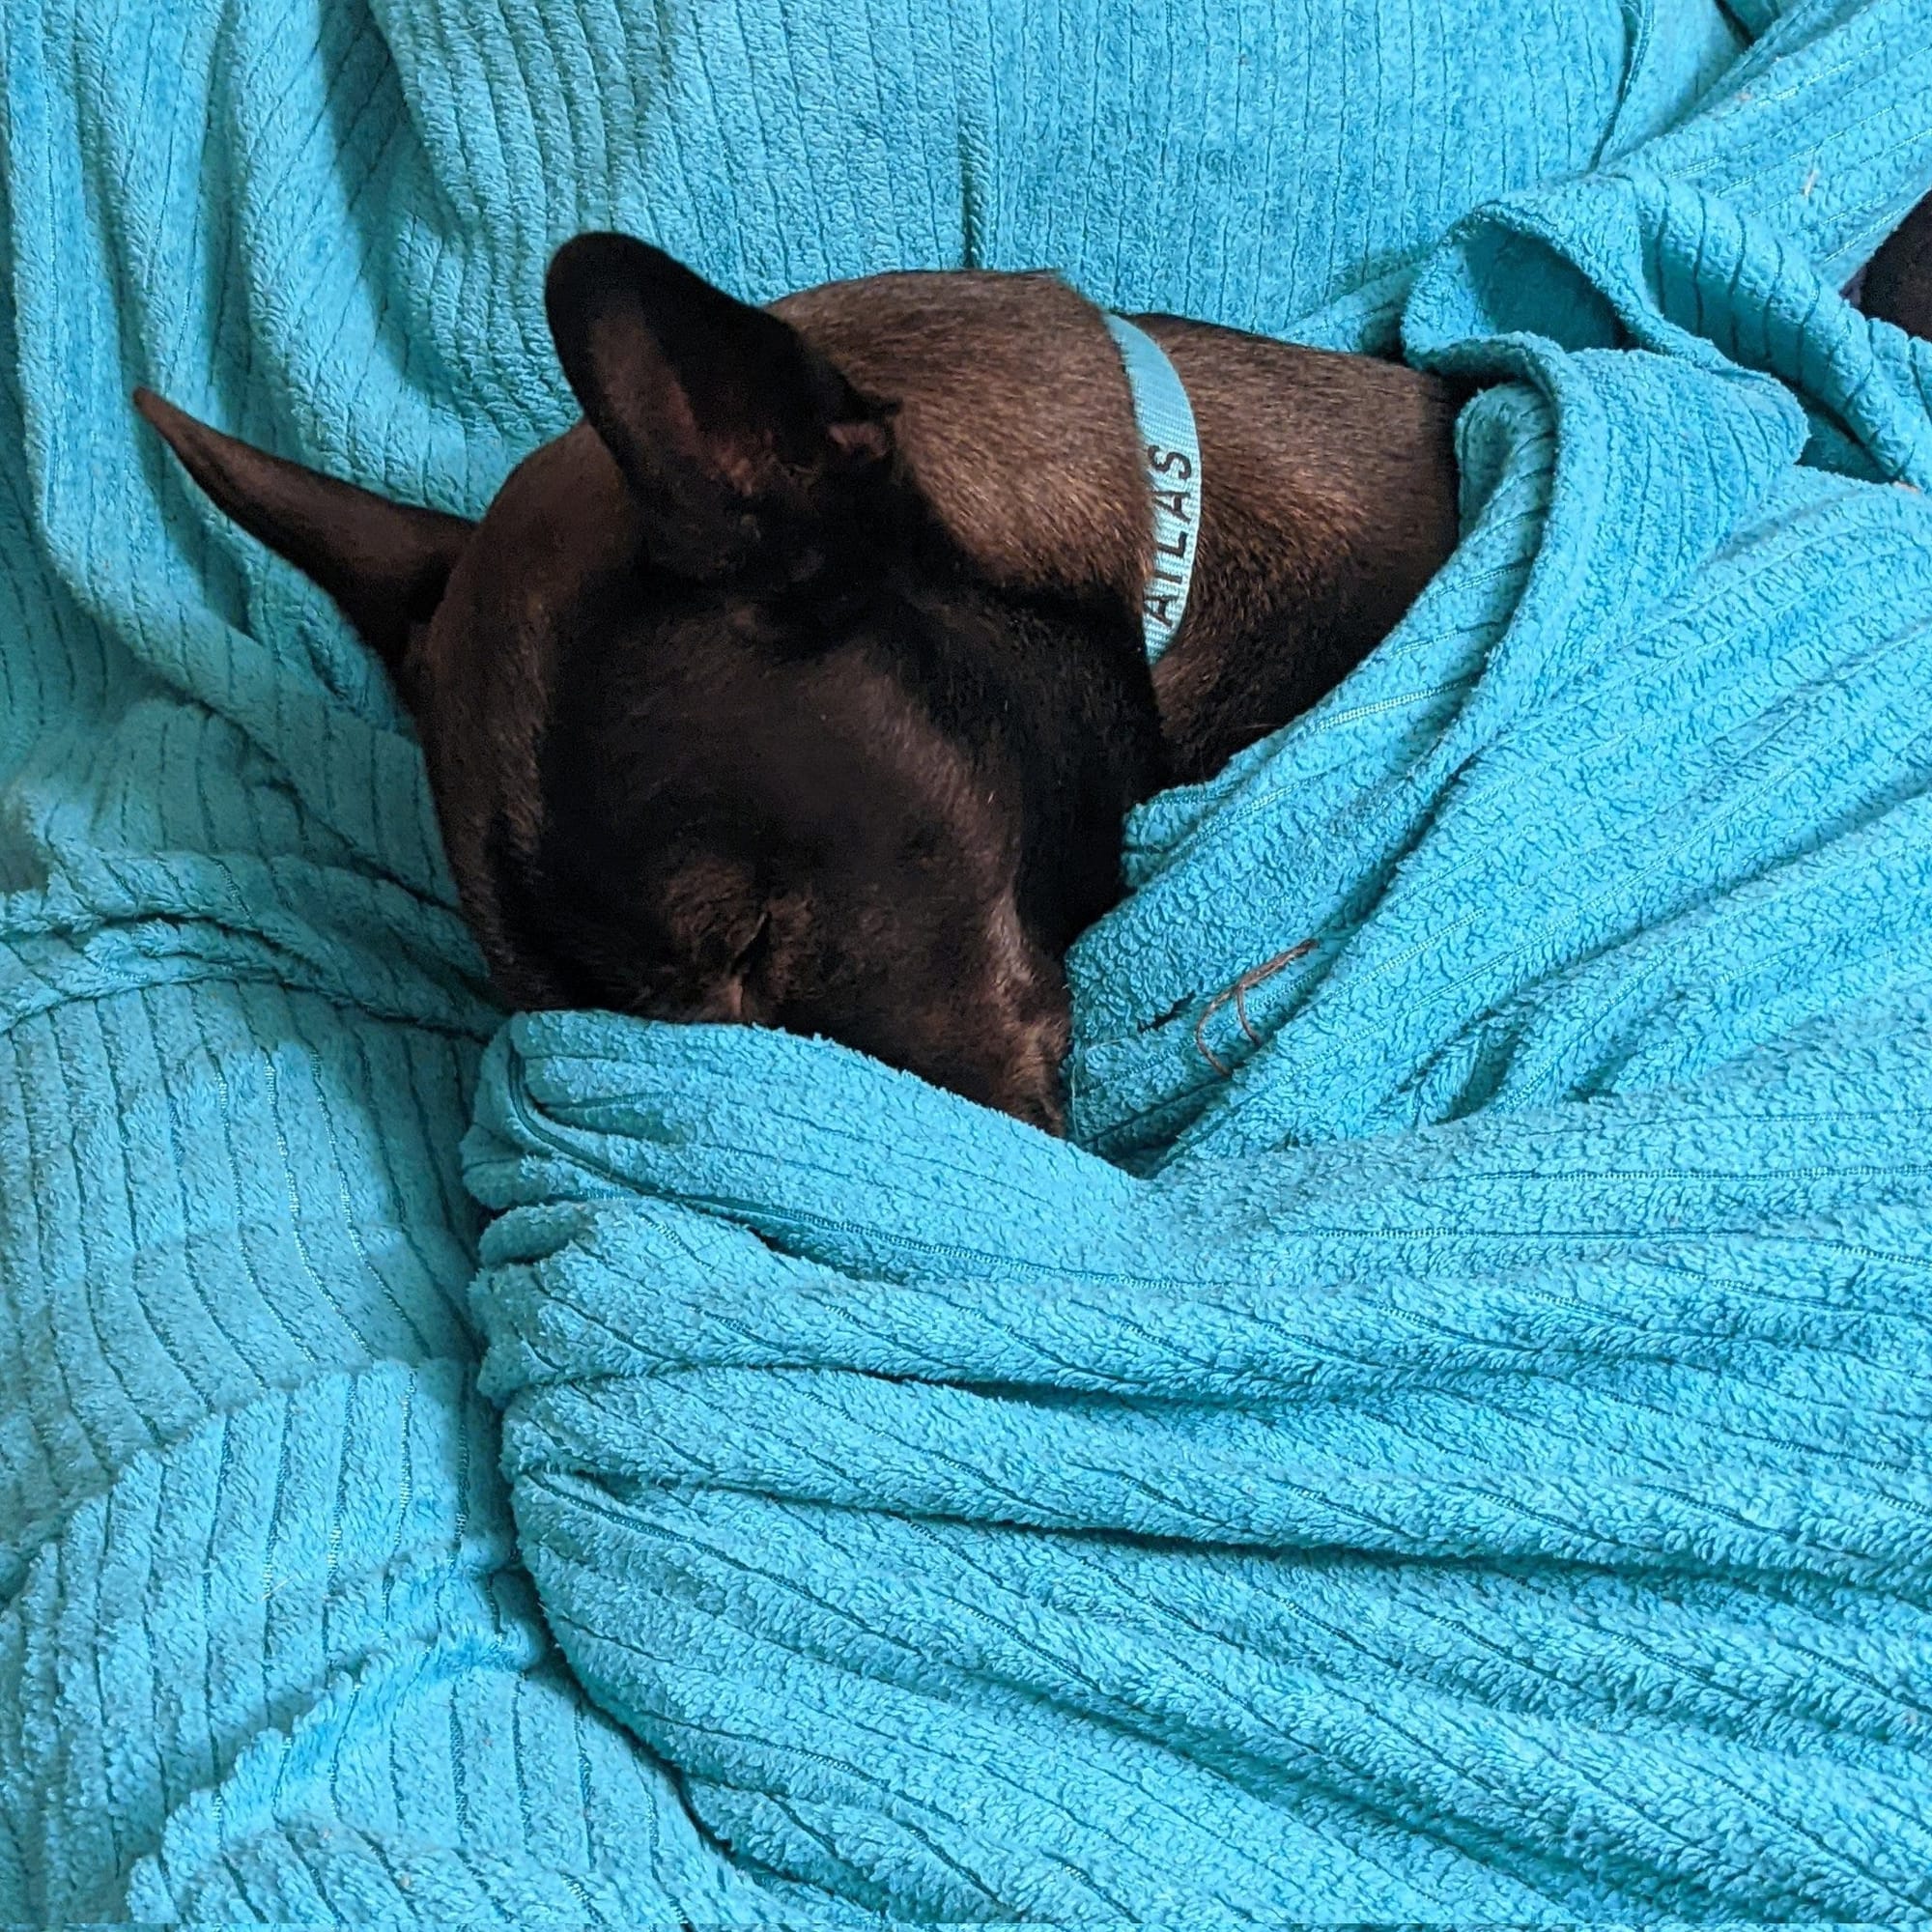 Atlas, a mostly black pit bull/husky/german shepherd mix, lies curled up under a bright turquoise blanket. His neck and head are sticking out, but he's tucked his nose into a fold of the blanket.